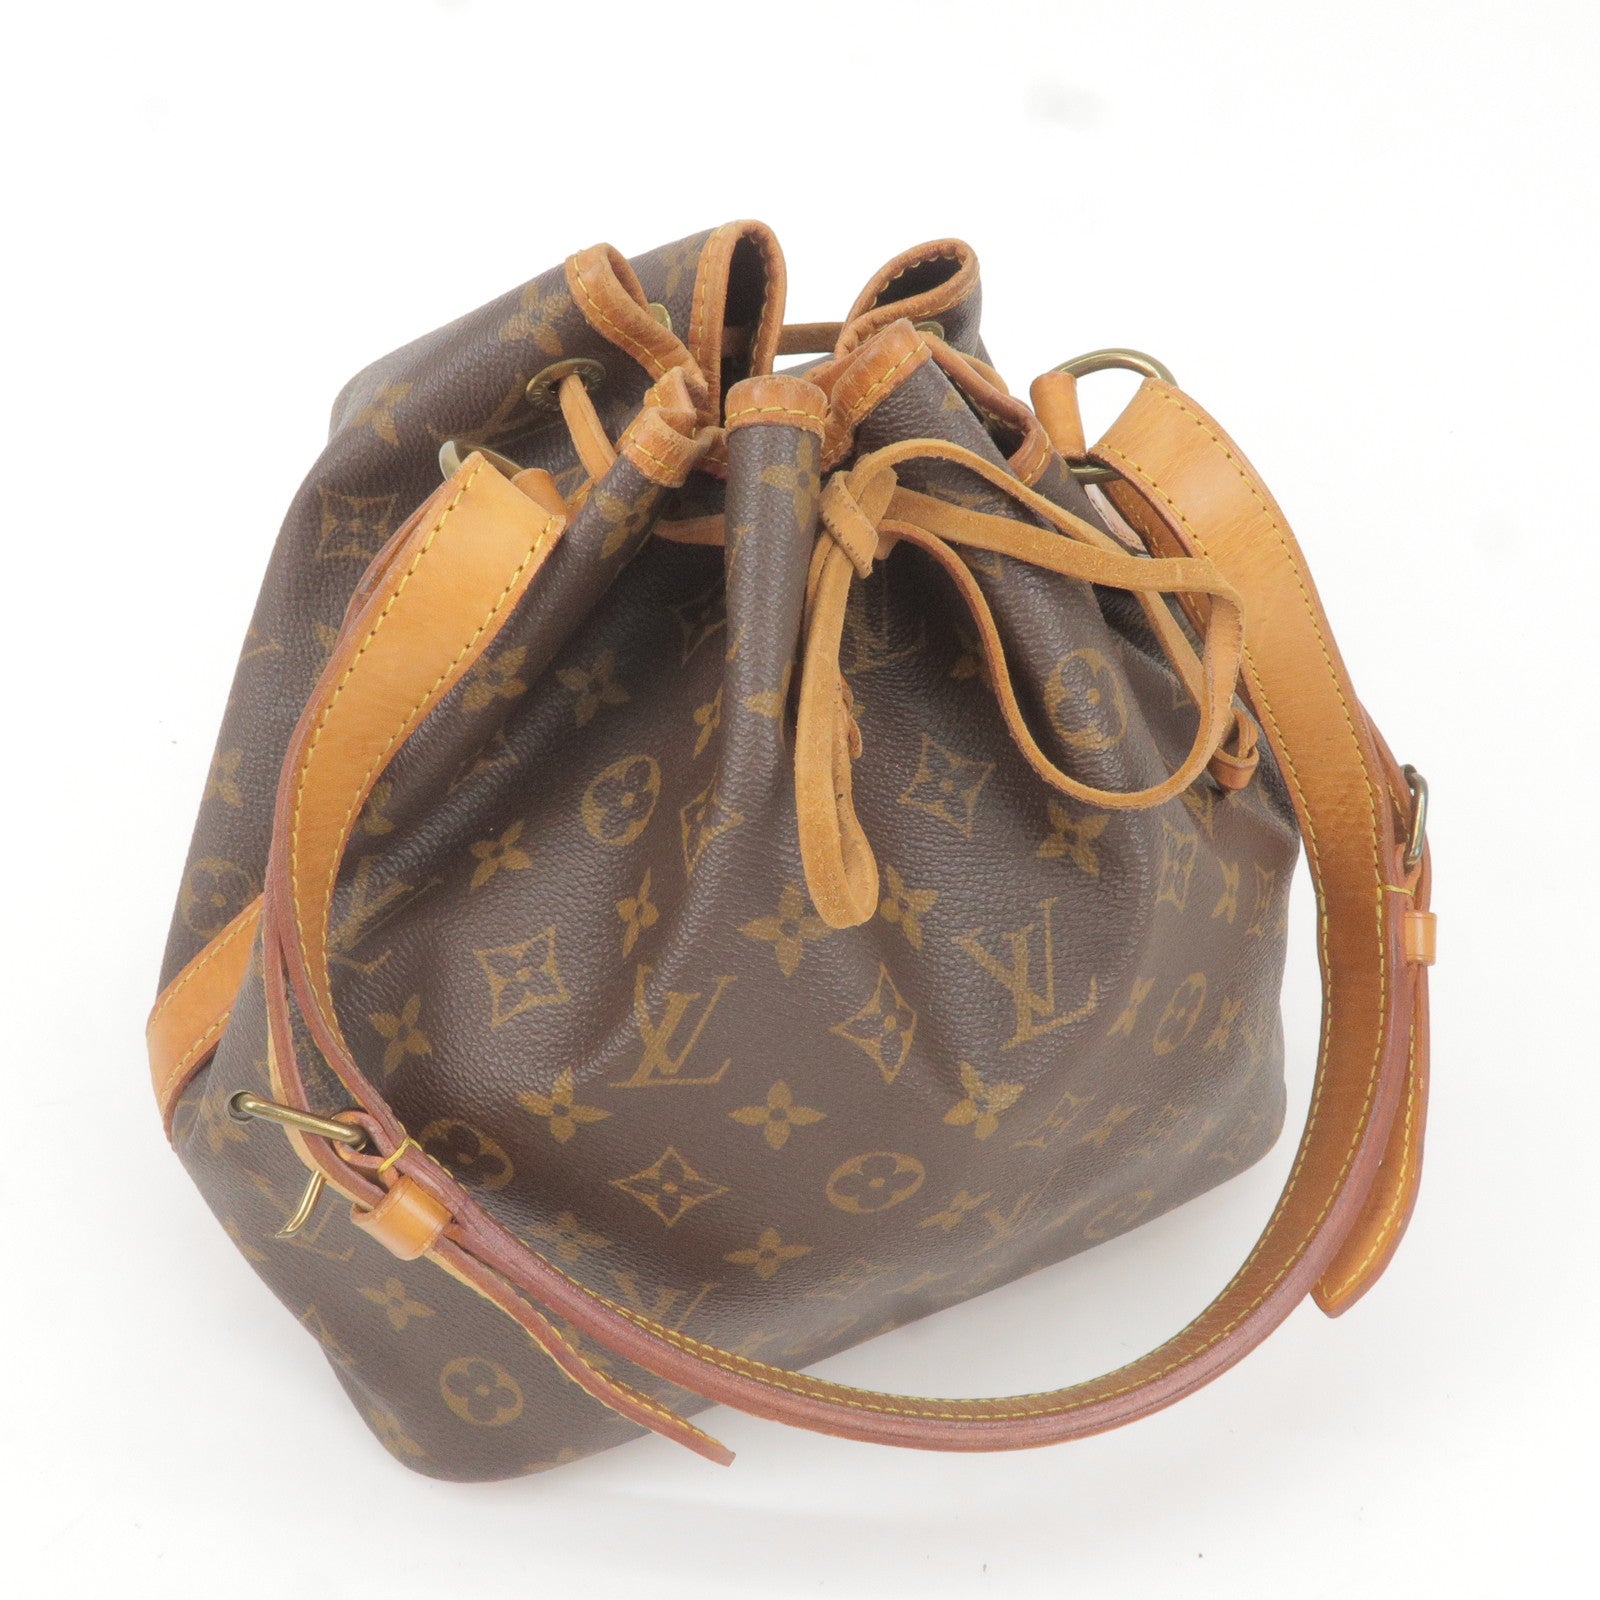 Porte documents jour leather weekend bag Louis Vuitton Brown in